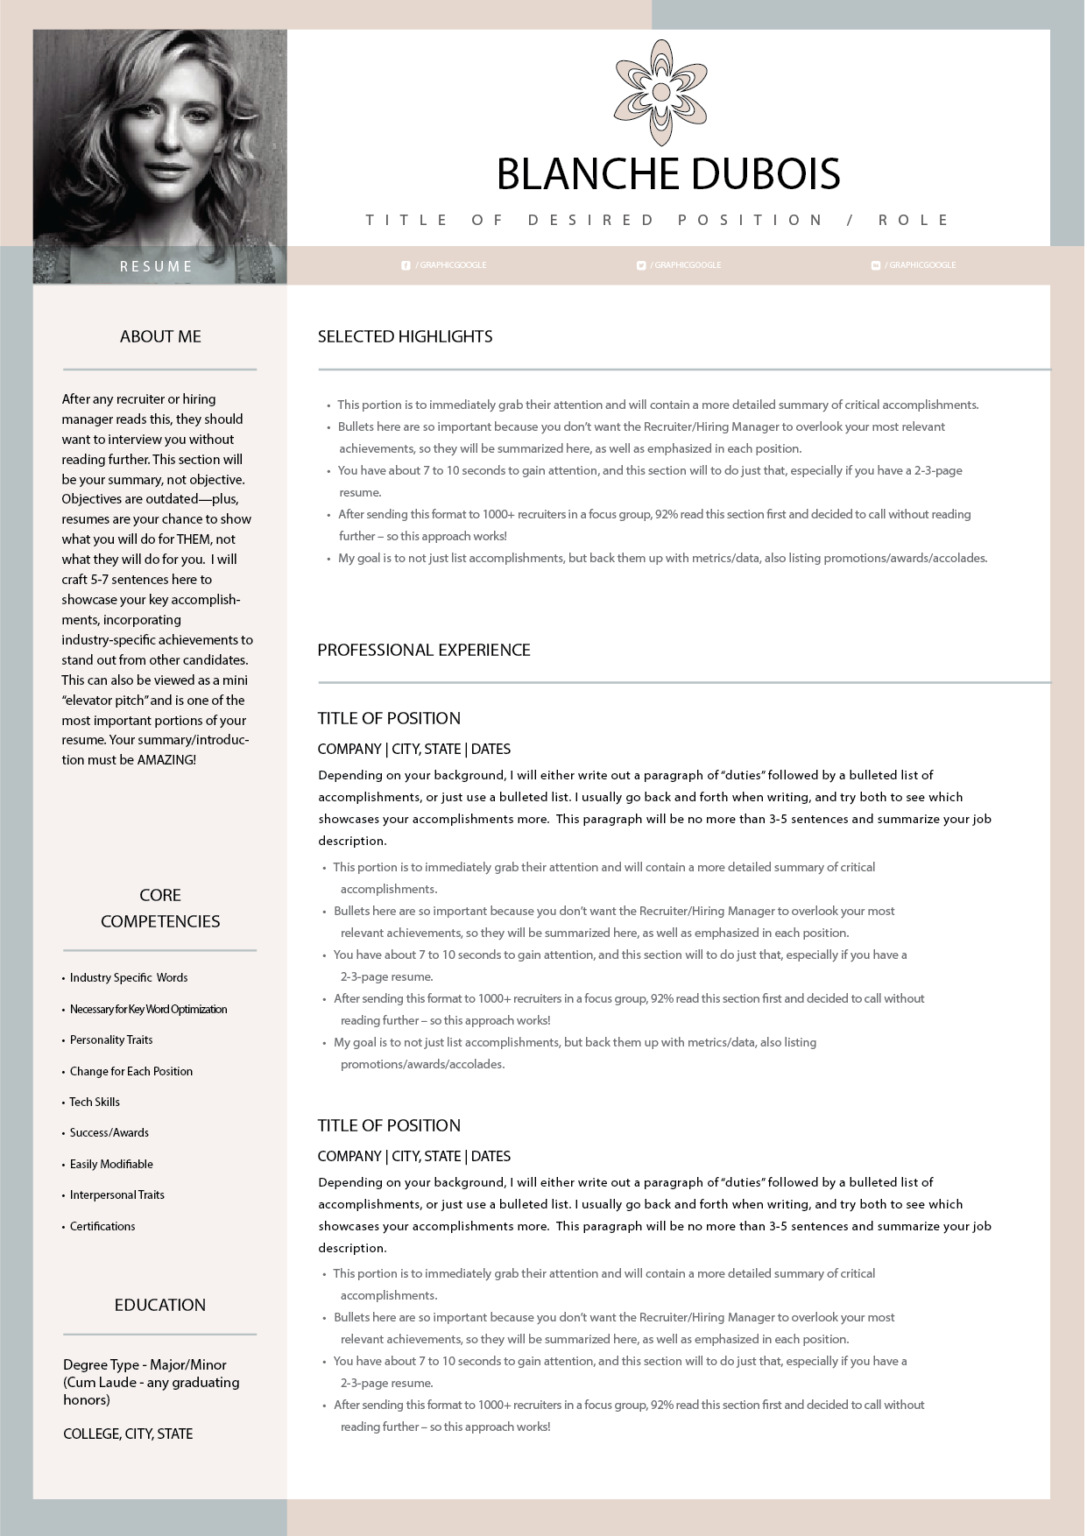 Graphical Resume – My Improved Resume